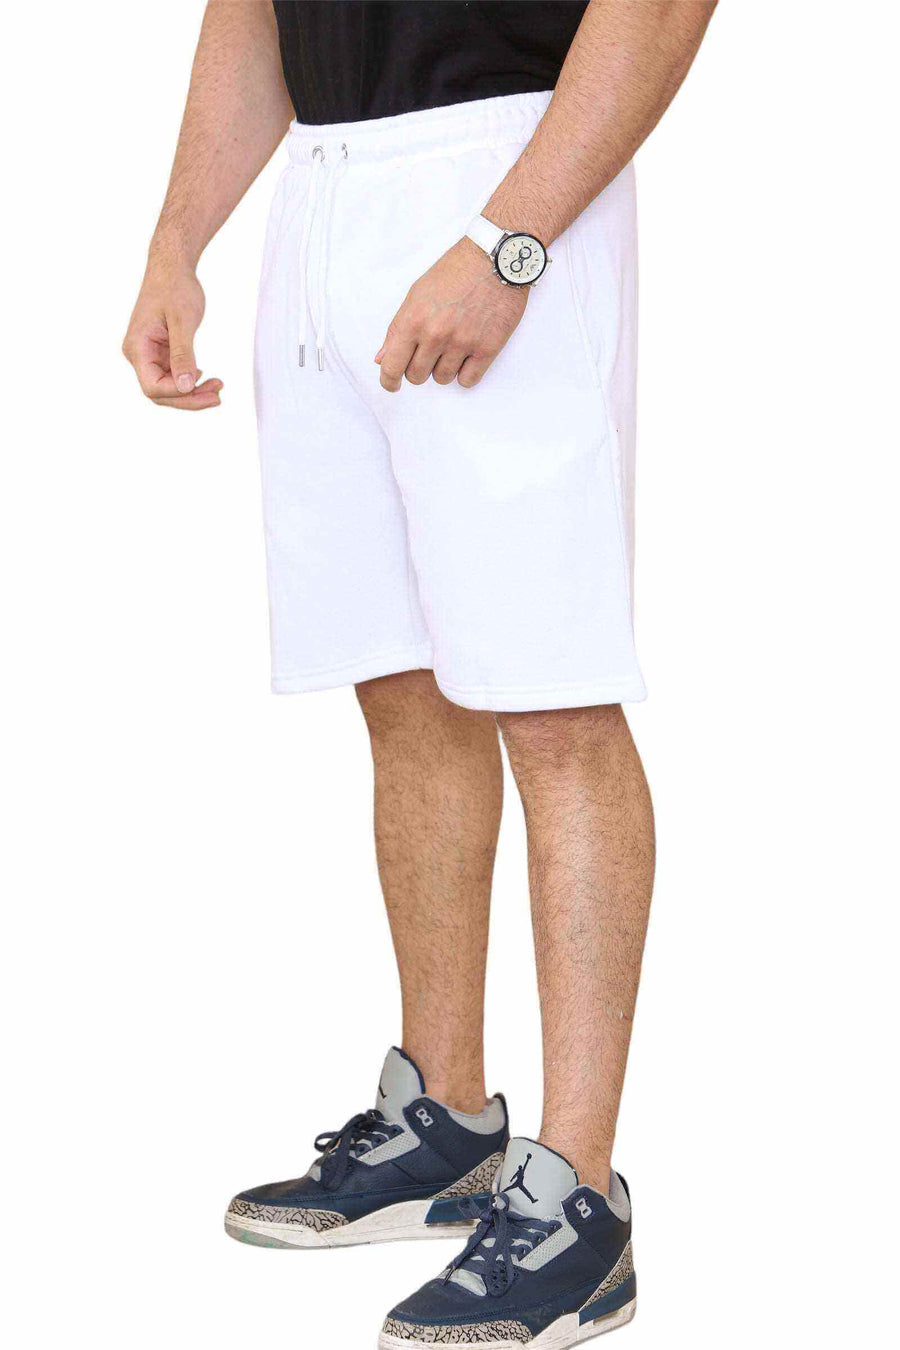 Left Side View of Men's Gym Shorts in White for Your Active Lifestyle